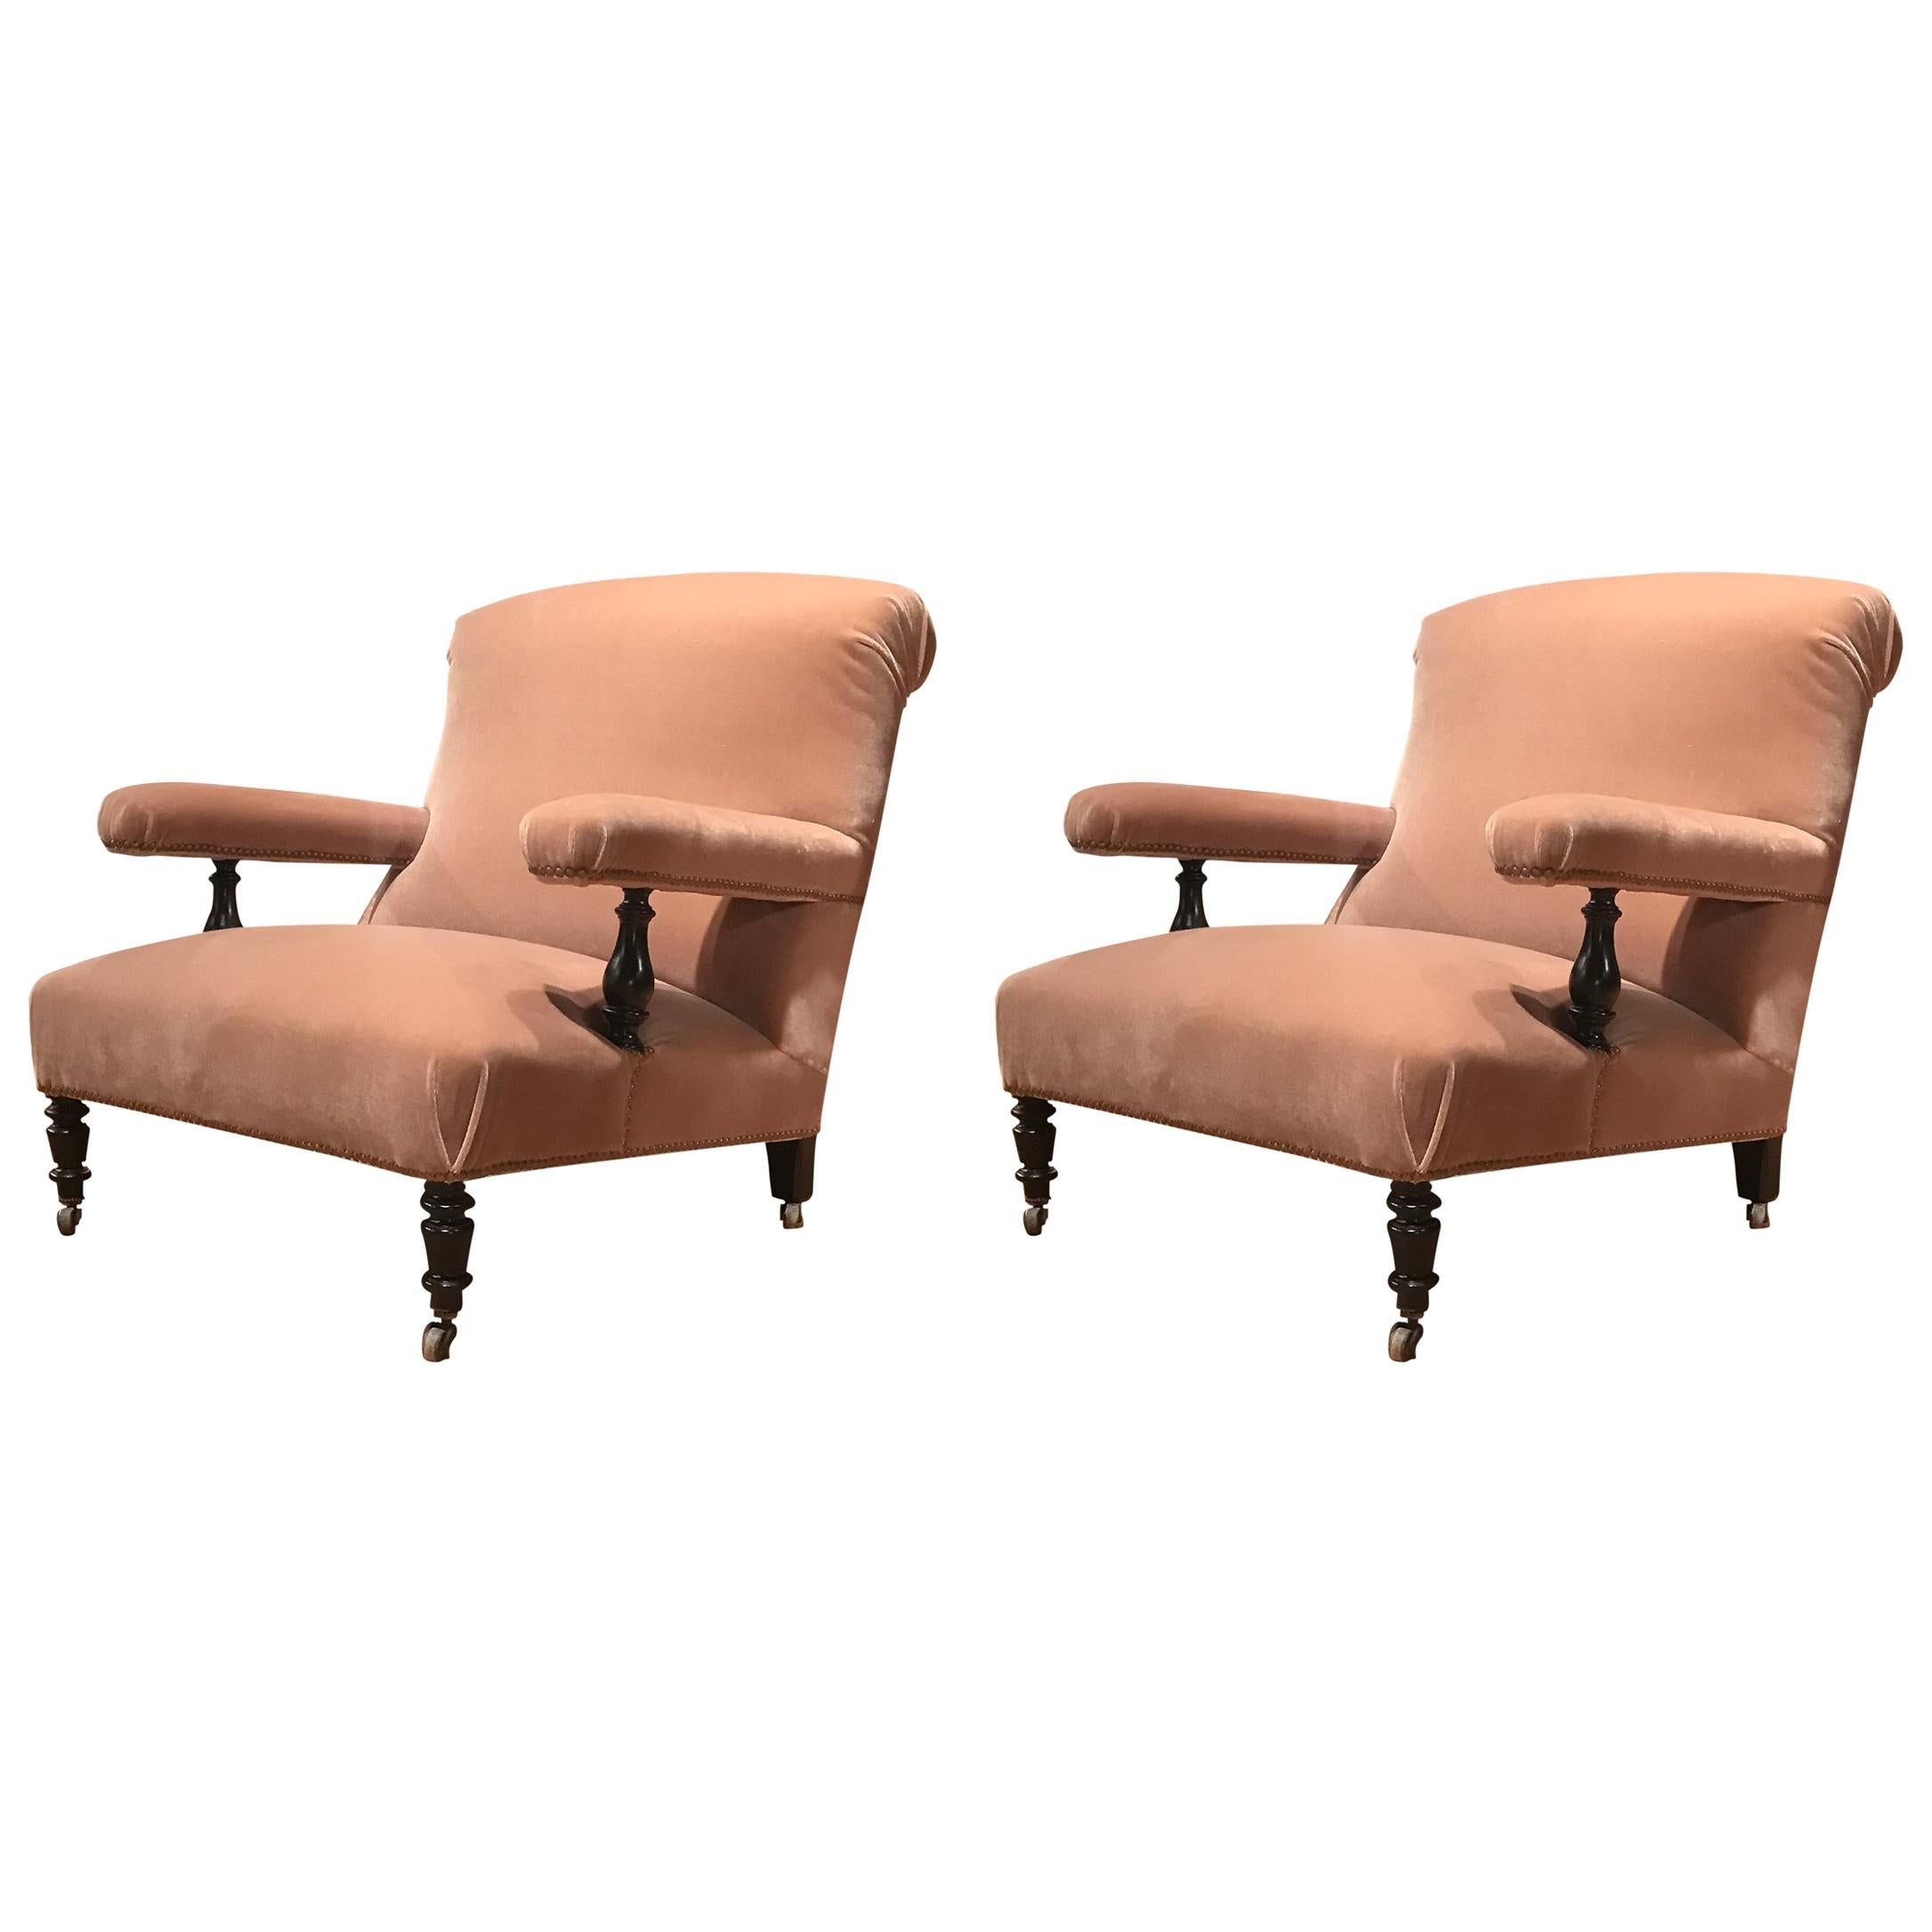 Pair of French 19th Century Armchairs with Mohair Upholstery